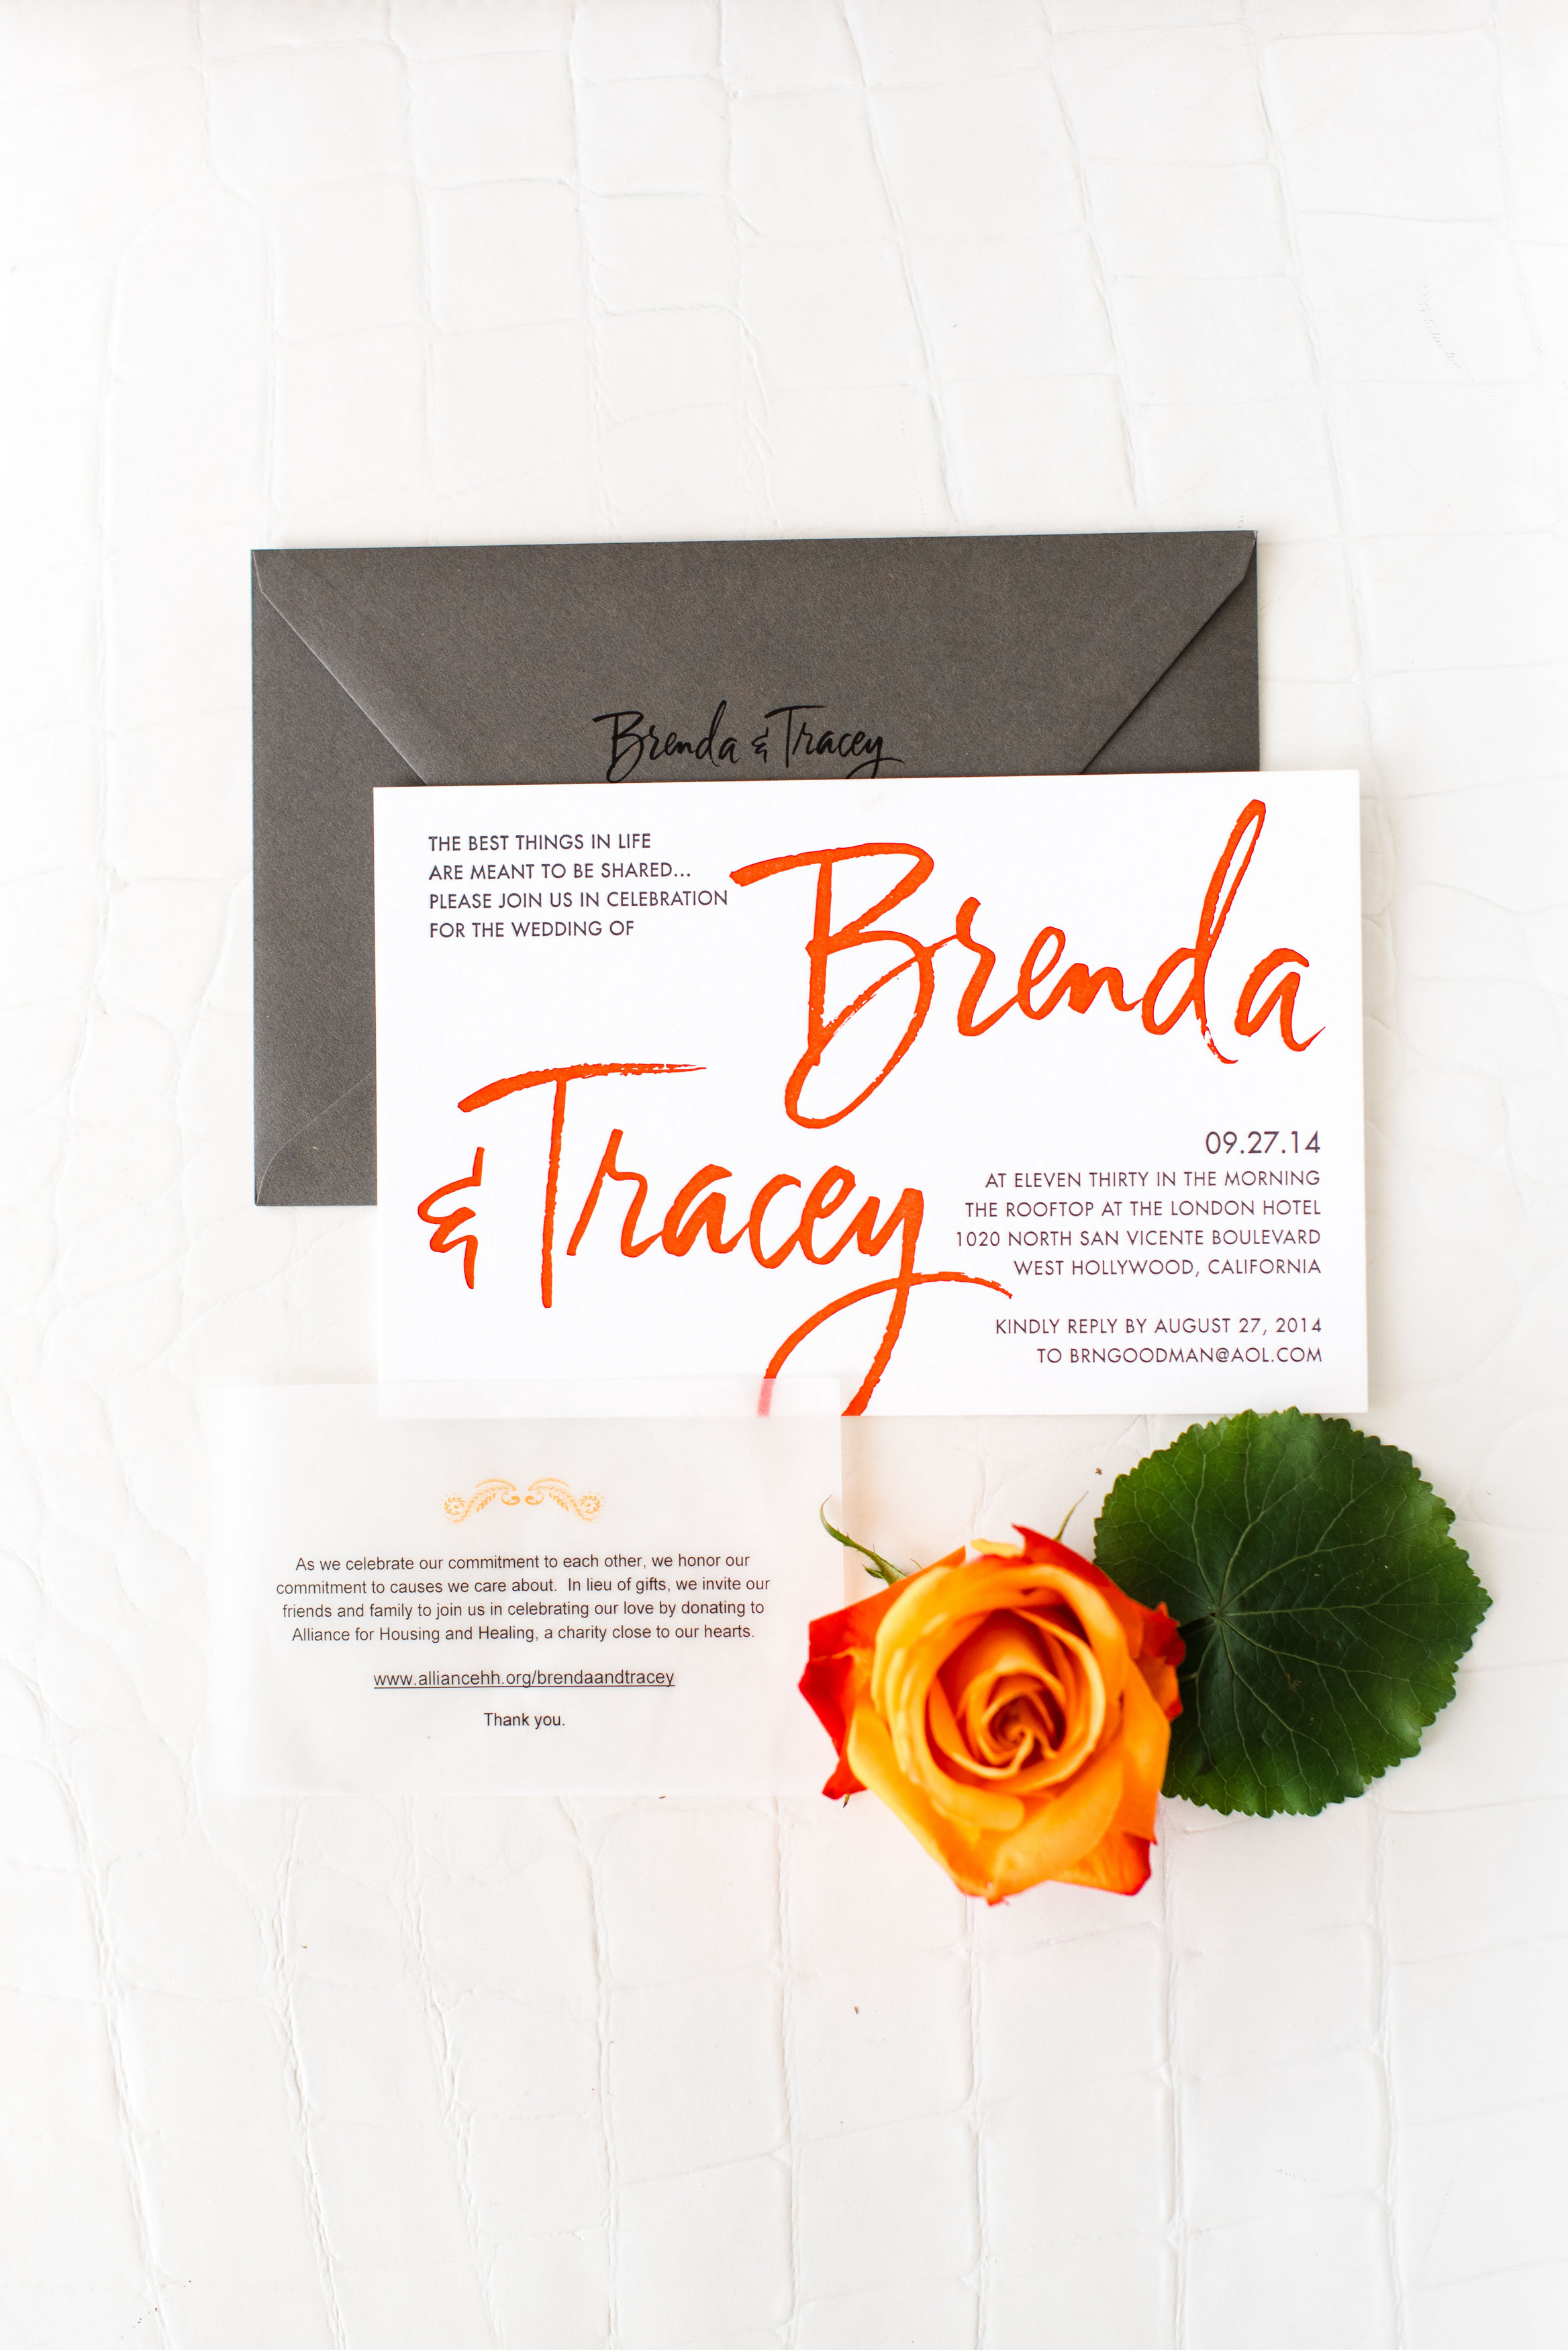 View More: http://sanazphotography.pass.us/brenda-tracey-wed